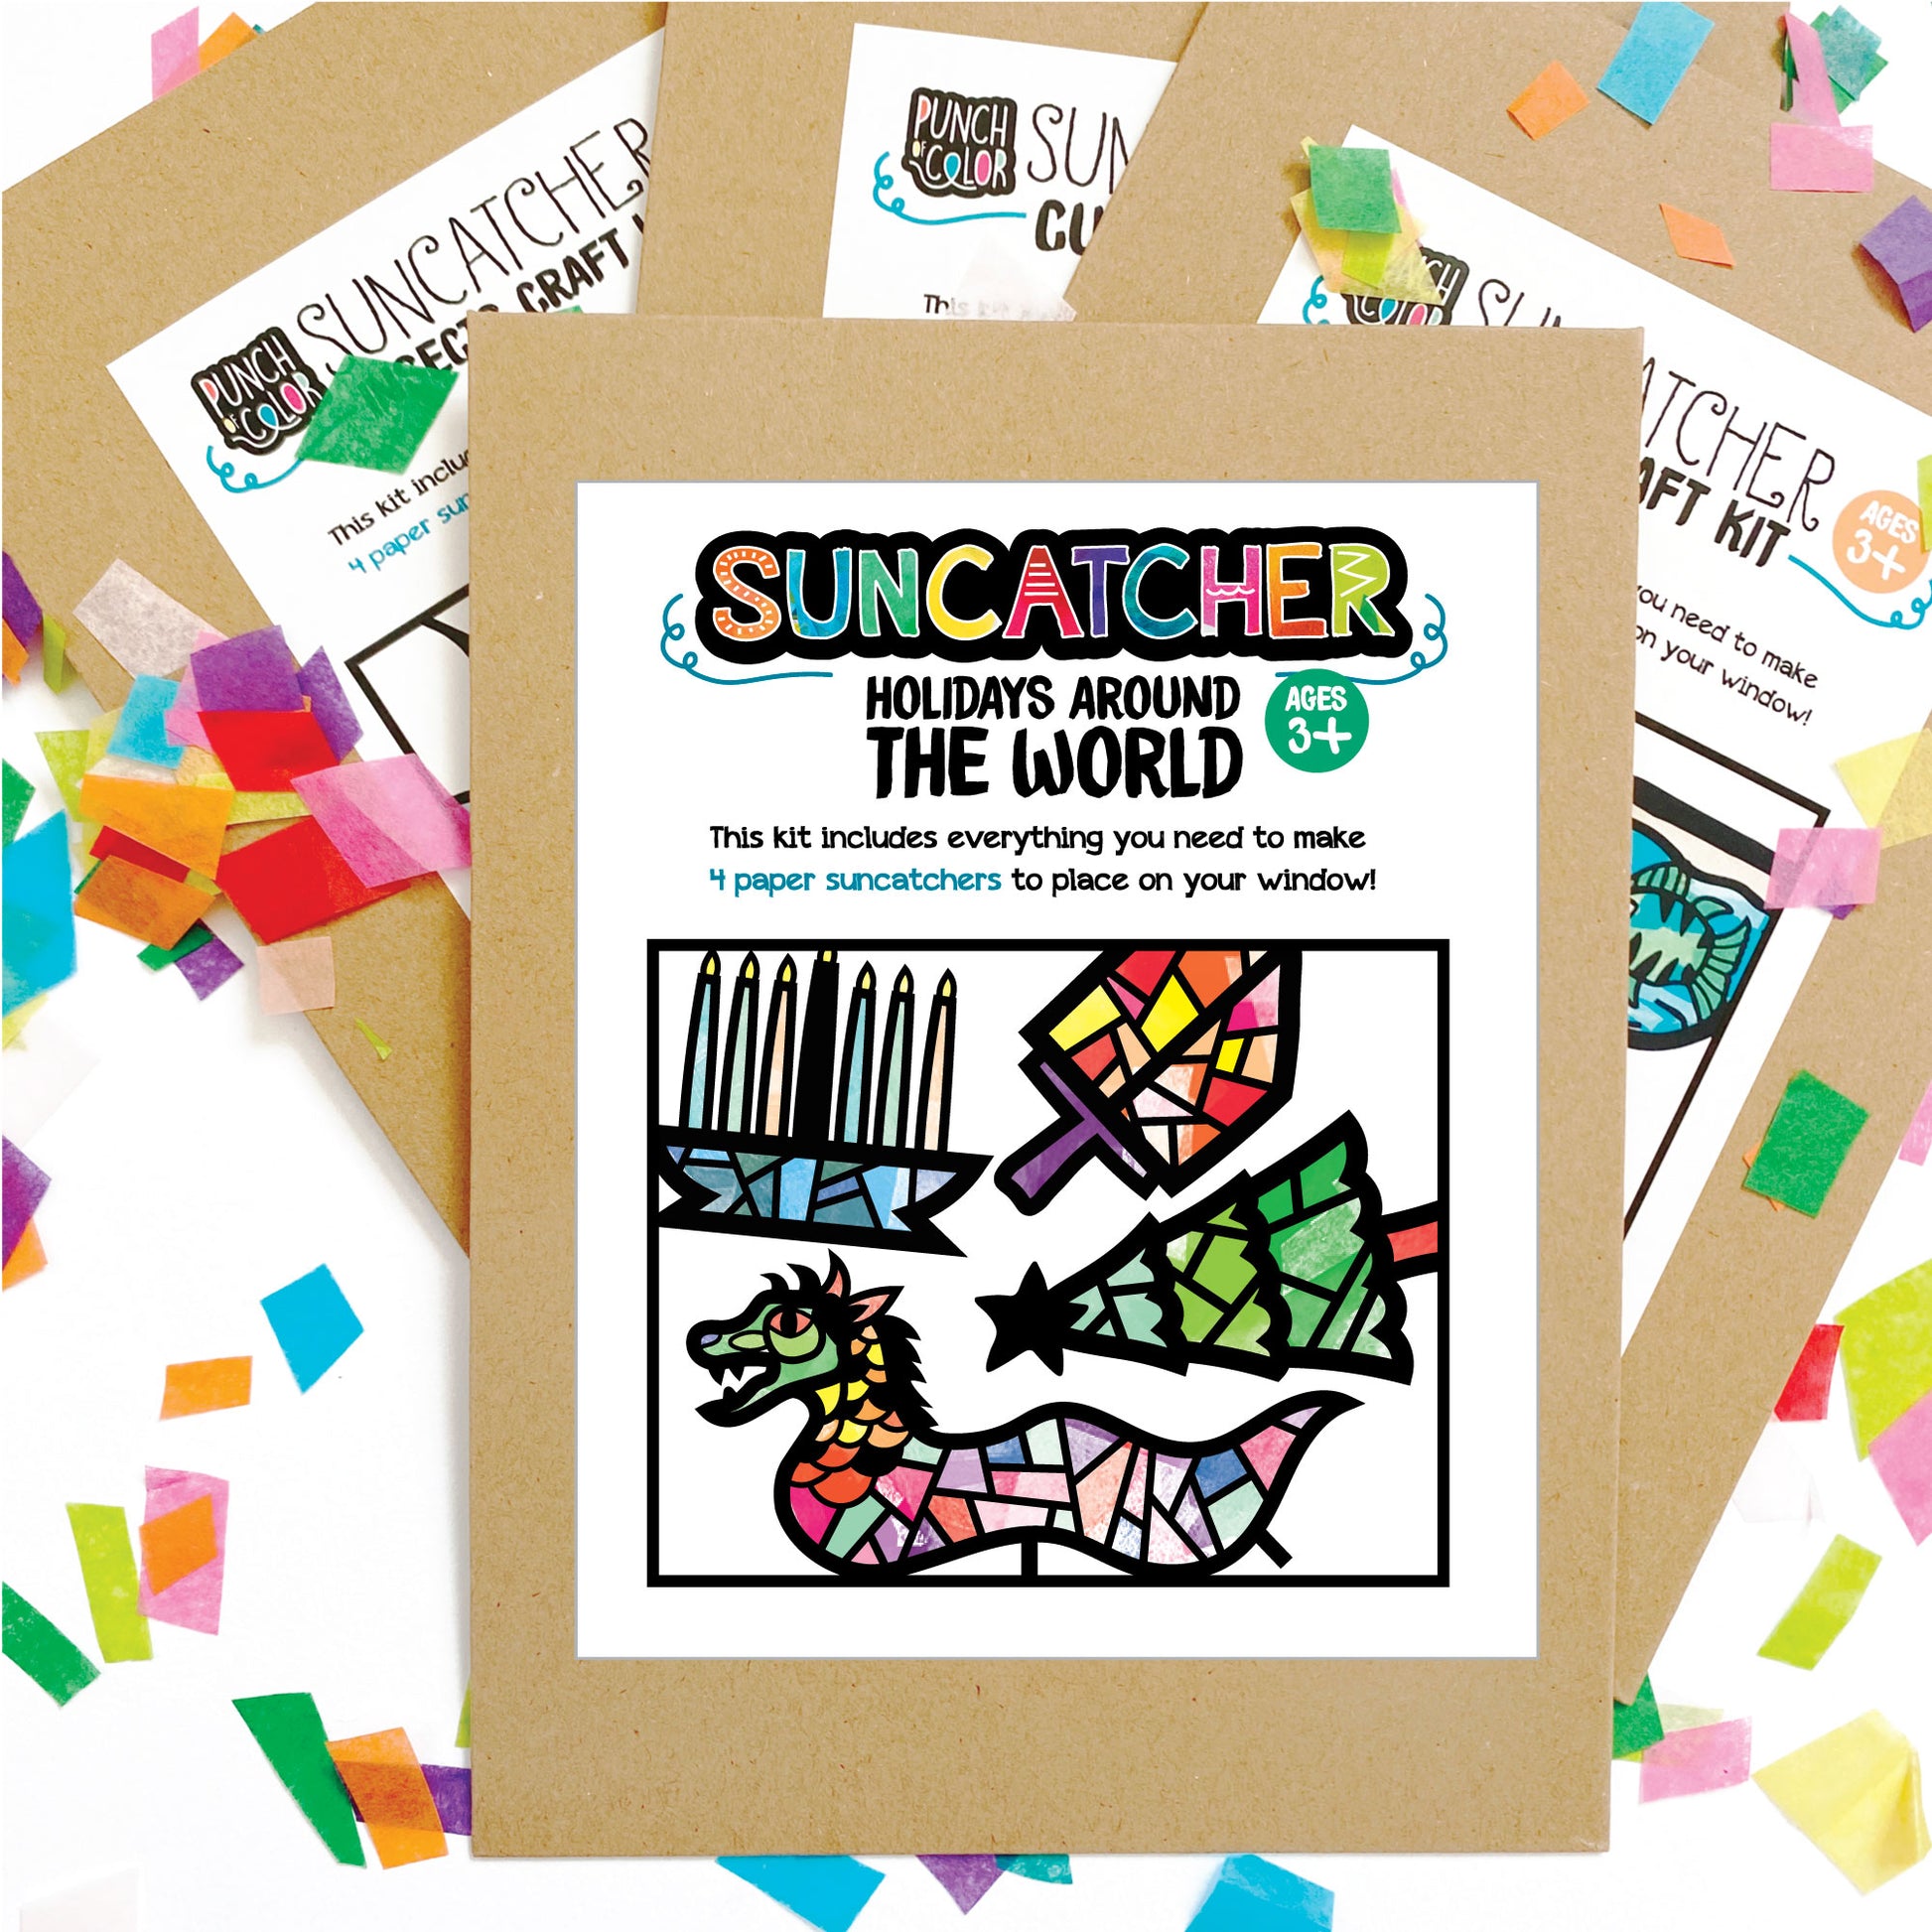 Holidays around the world suncatcher arts and crafts kit, a mess-free paper based activity for toddlers and kids.